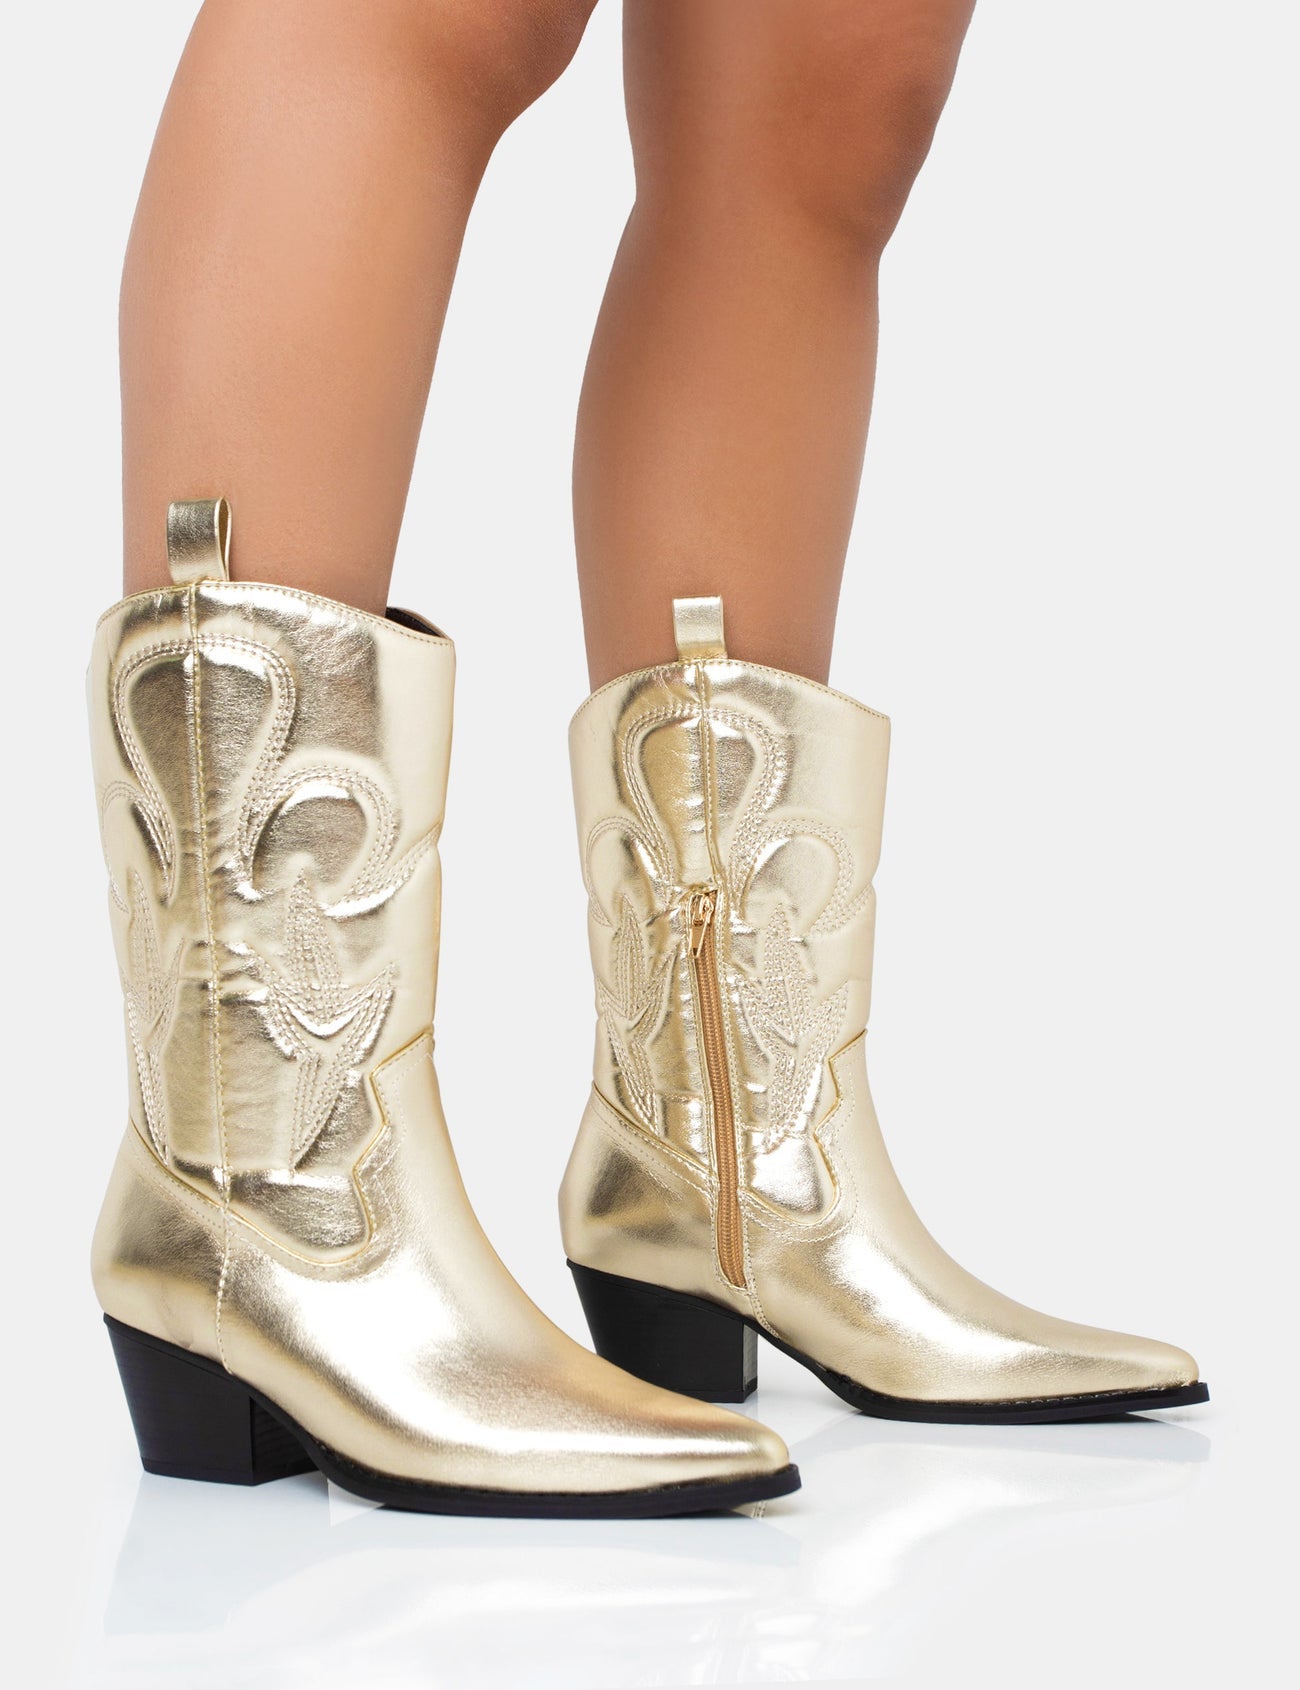 How to: Western Boots – Fashion, Latest Trends, Facts